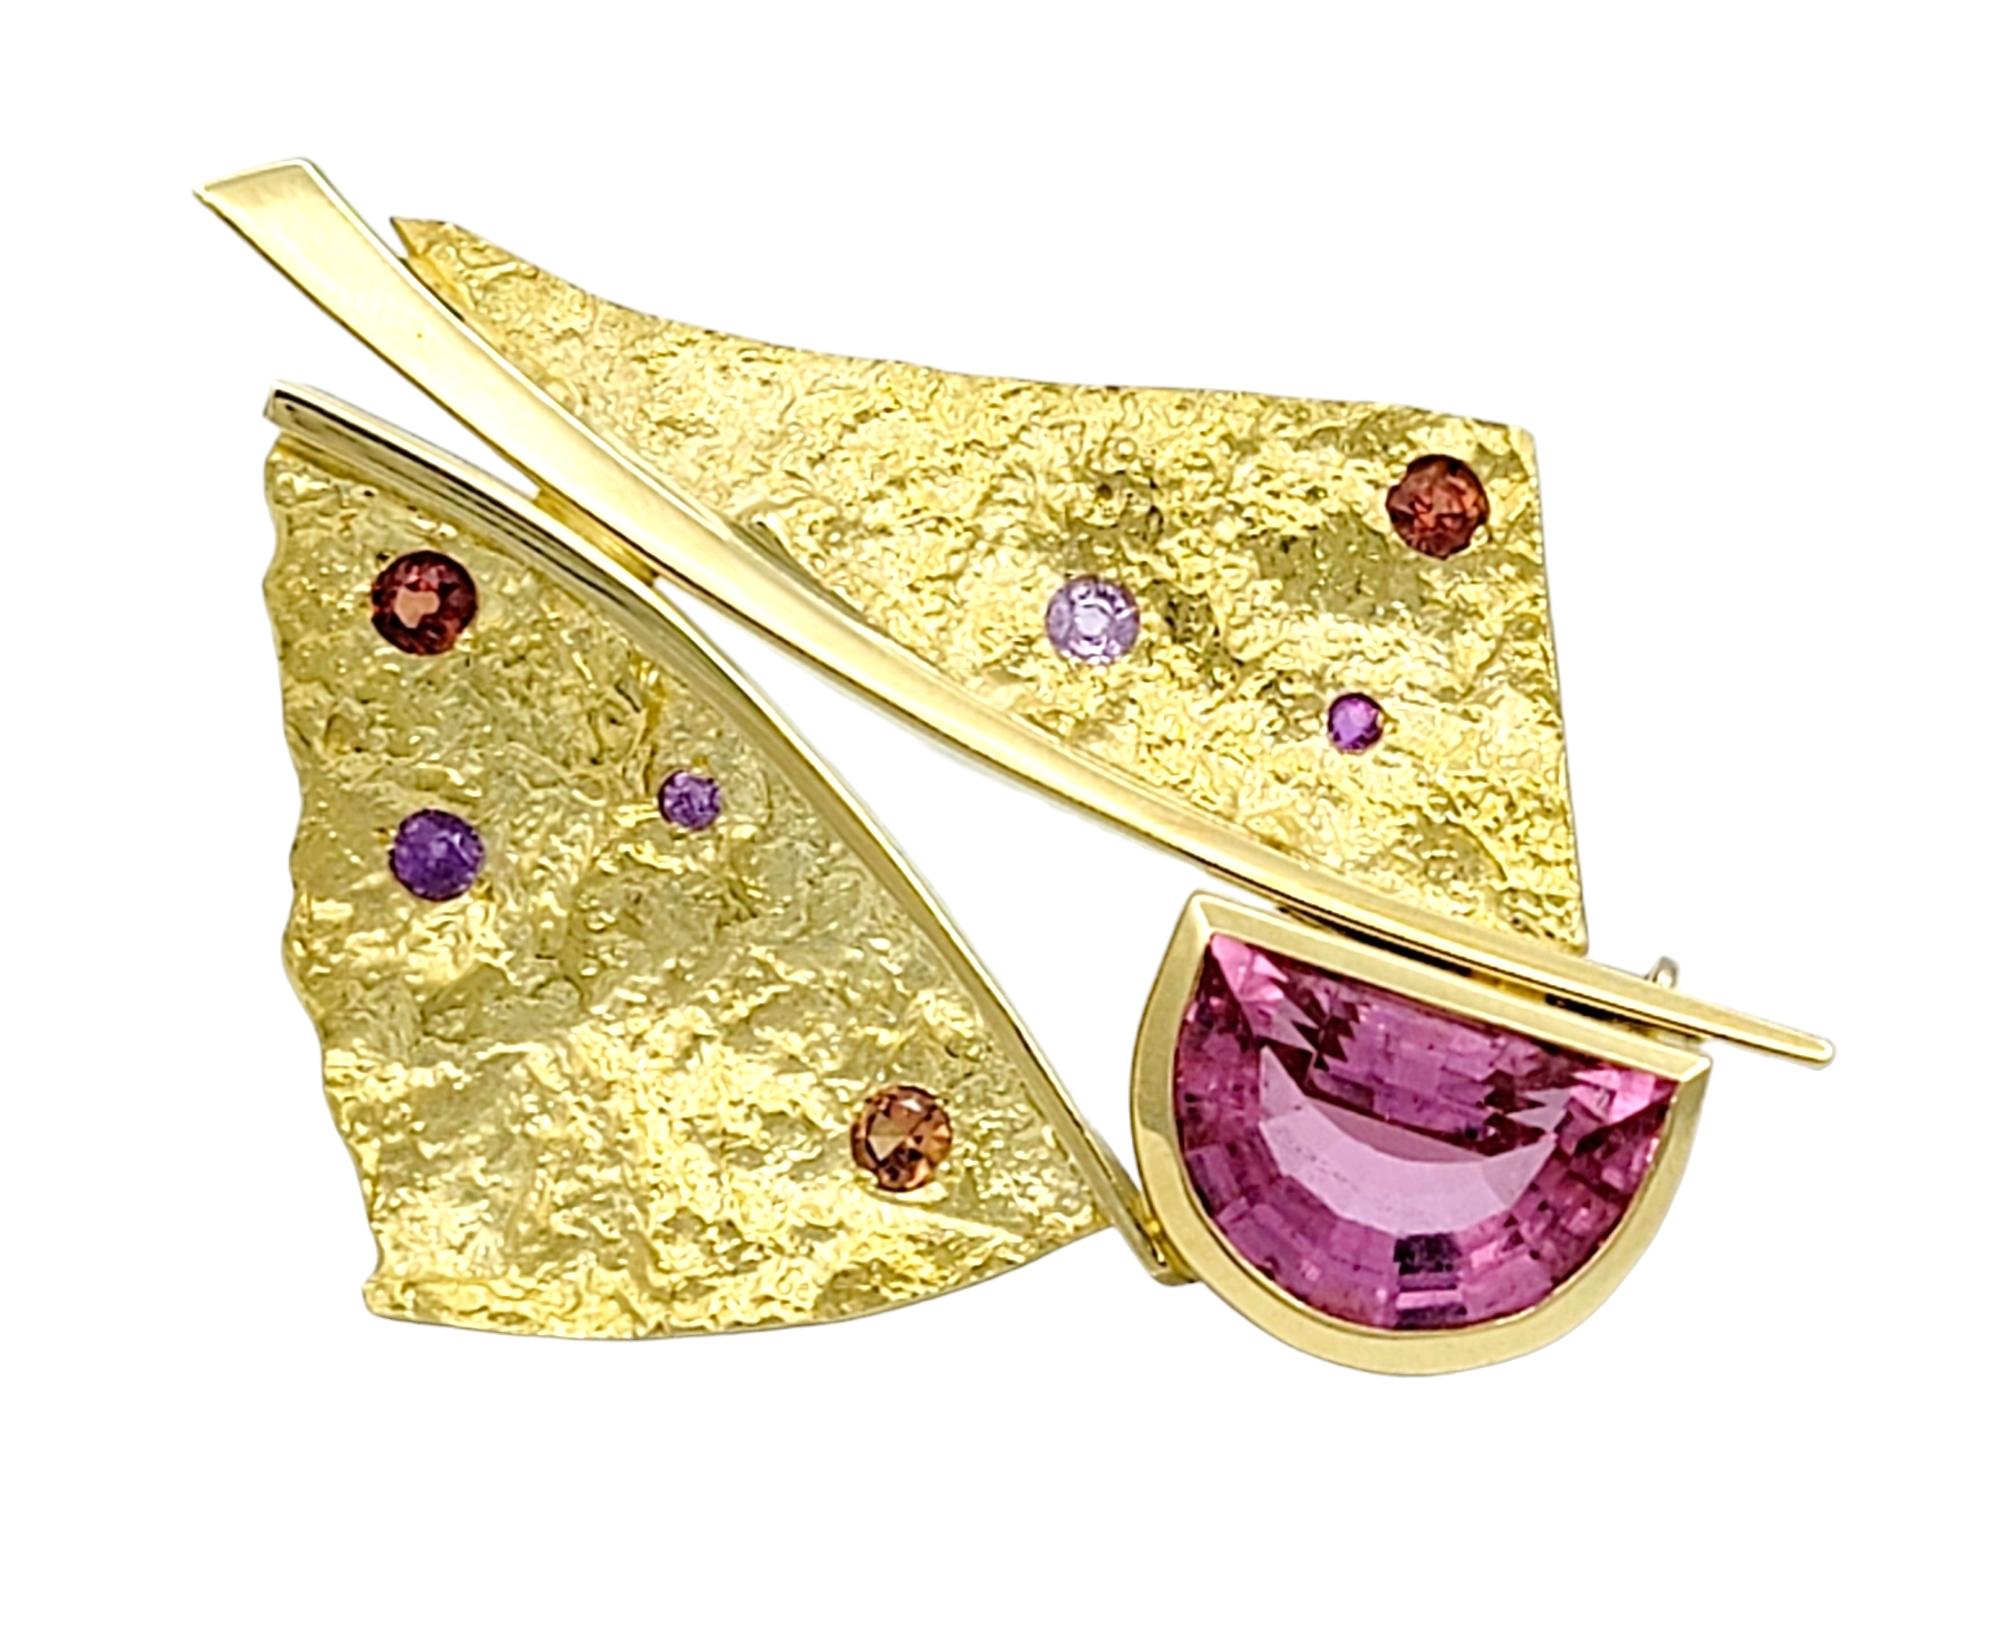 This Susan Helmich brooch is a magnificent creation that seamlessly combines bold design and vibrant gemstones. Set in lustrous 18-karat yellow gold, the brooch features a large half-moon-shaped pink tourmaline as the main focal point, radiating